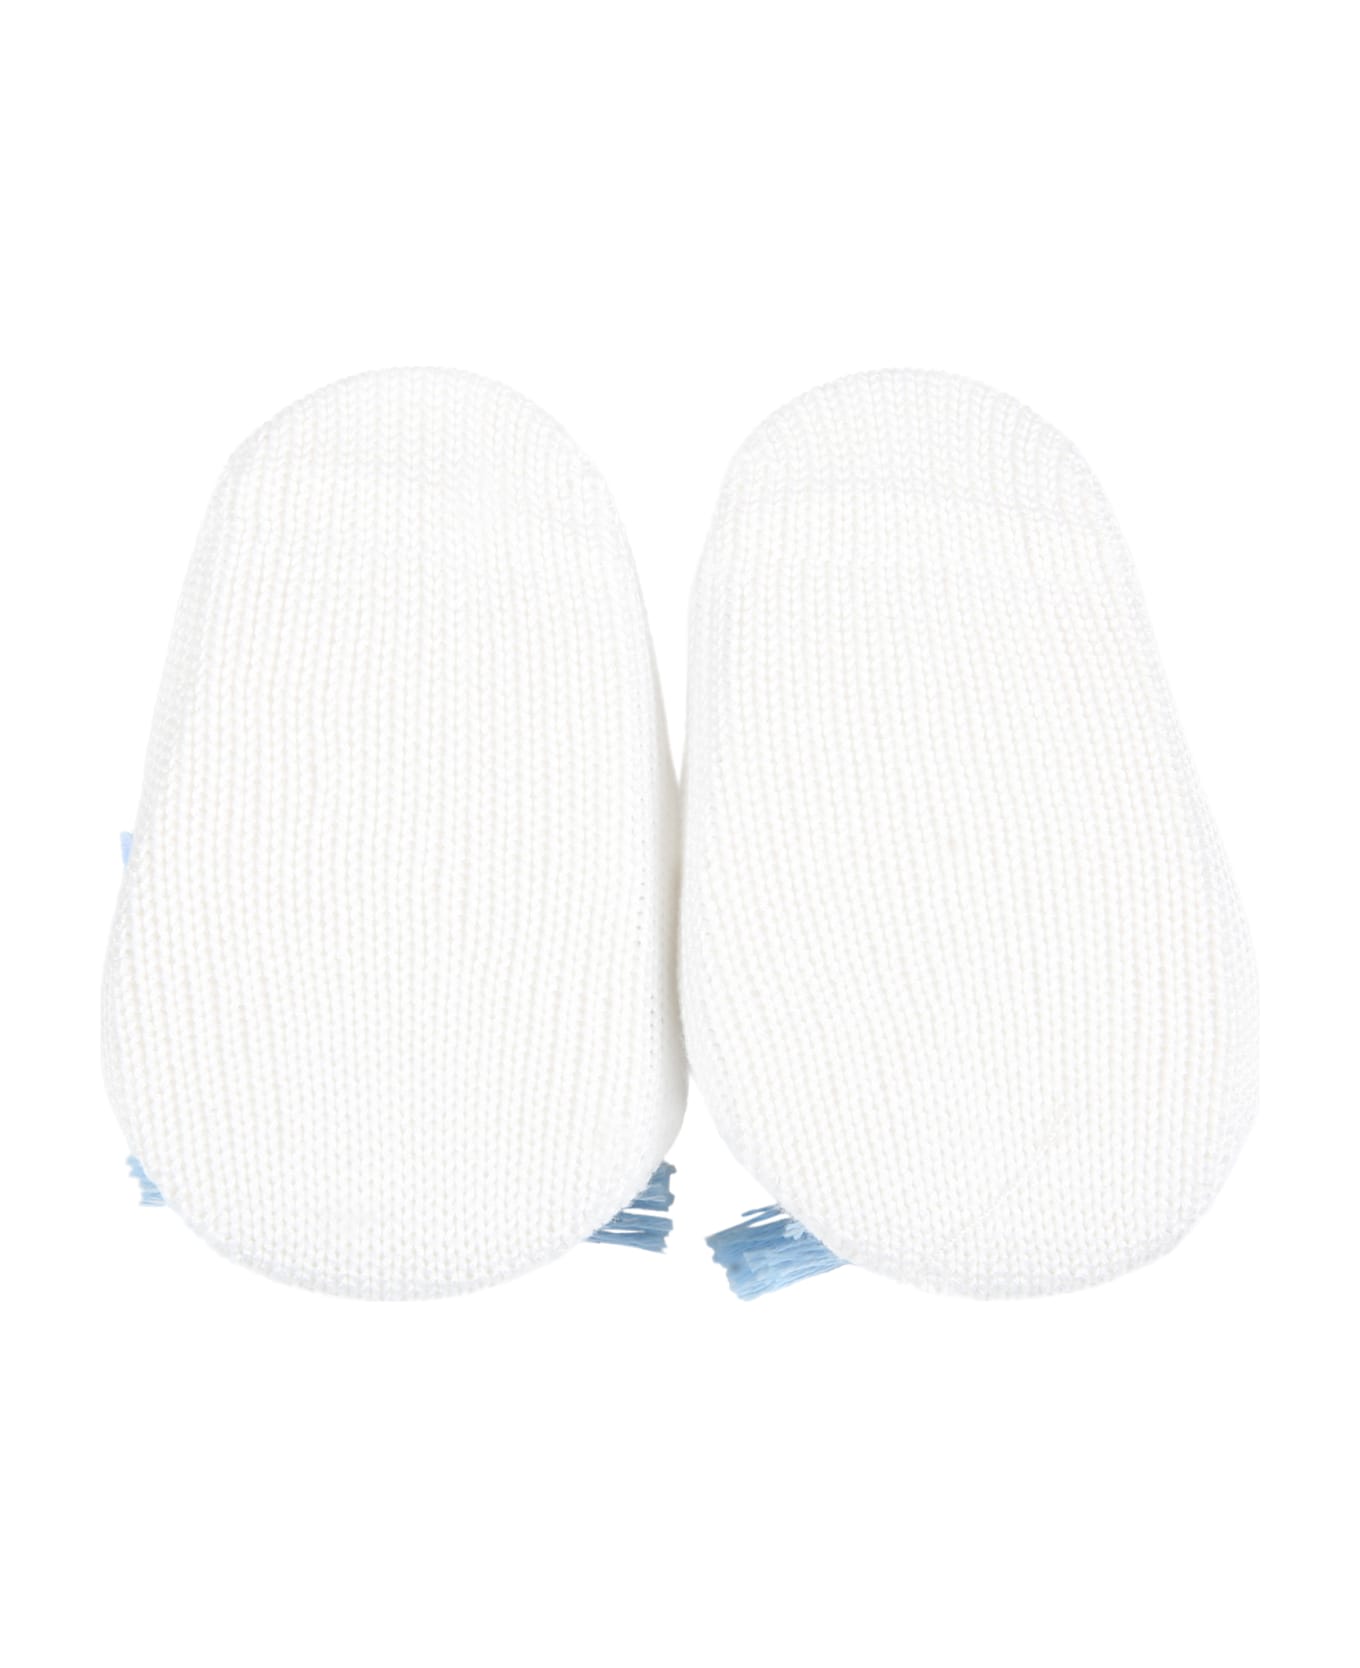 Story Loris White Baby-bootee For Baby Boy - White